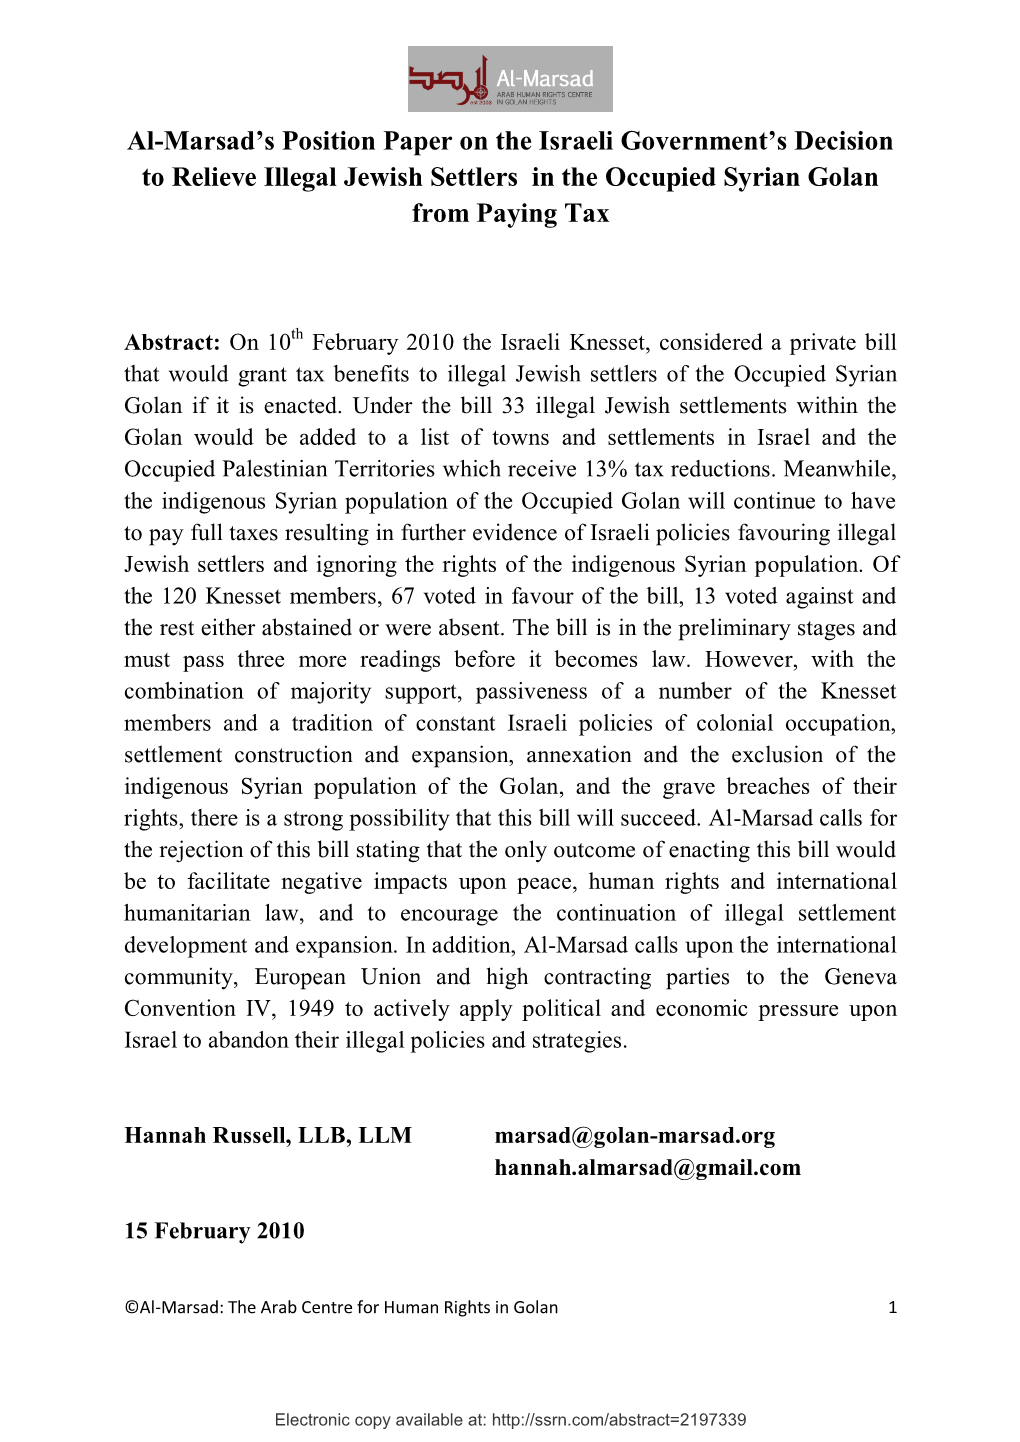 Position Paper on the Israeli Government’S Decision to Relieve Illegal Jewish Settlers in the Occupied Syrian Golan from Paying Tax